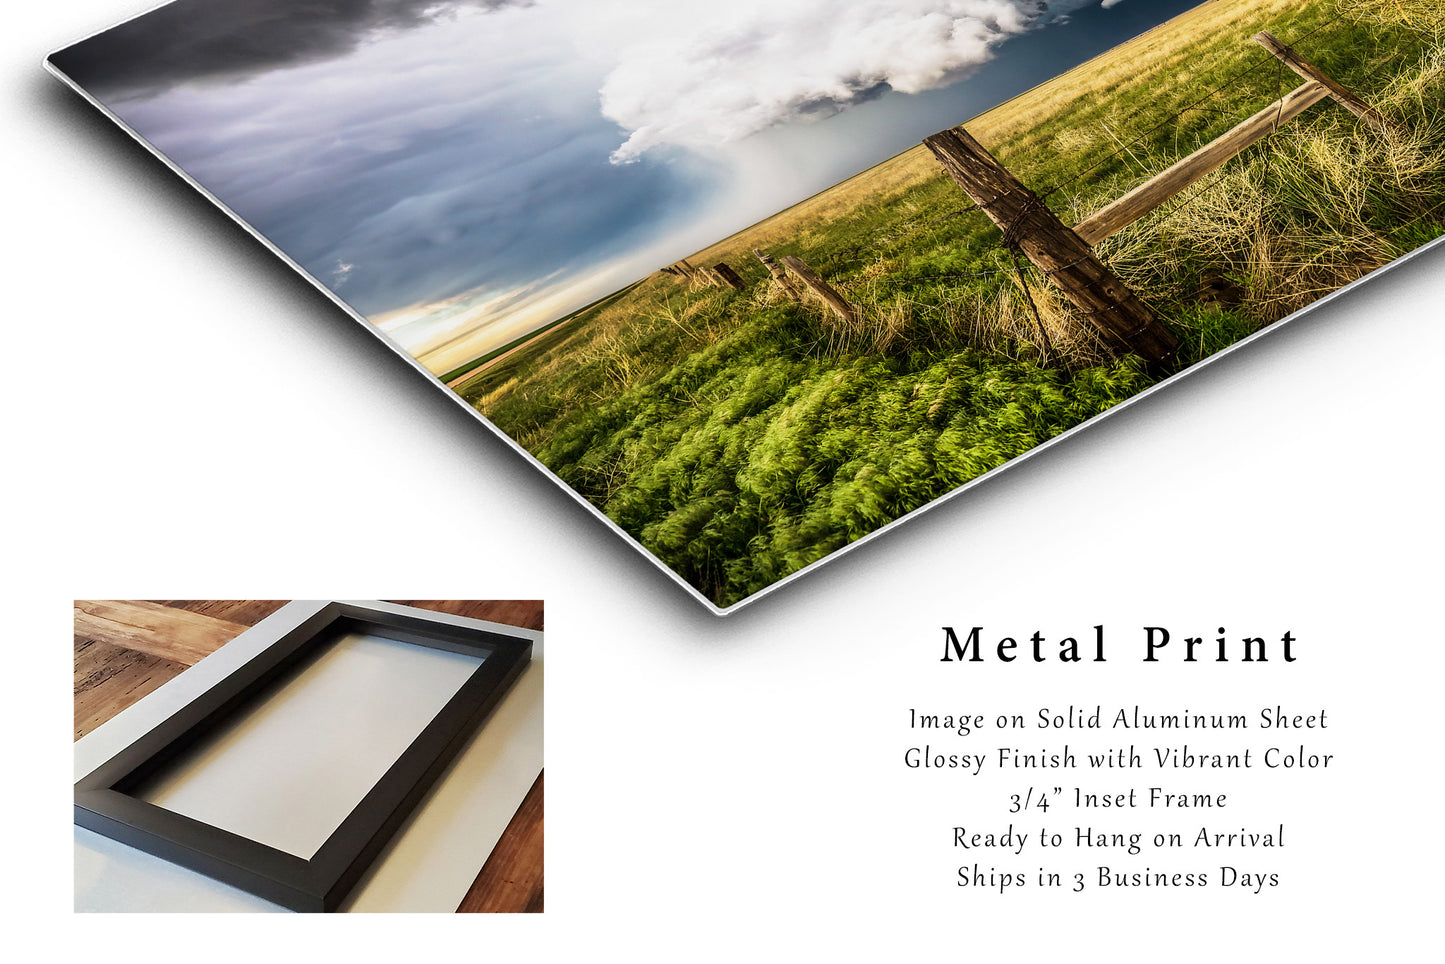 Supercell Thunderstorm Metal Print | Storm Photography | Colorado Wall Art | Prairie Photo | Great Plains Decor | Ready to Hang